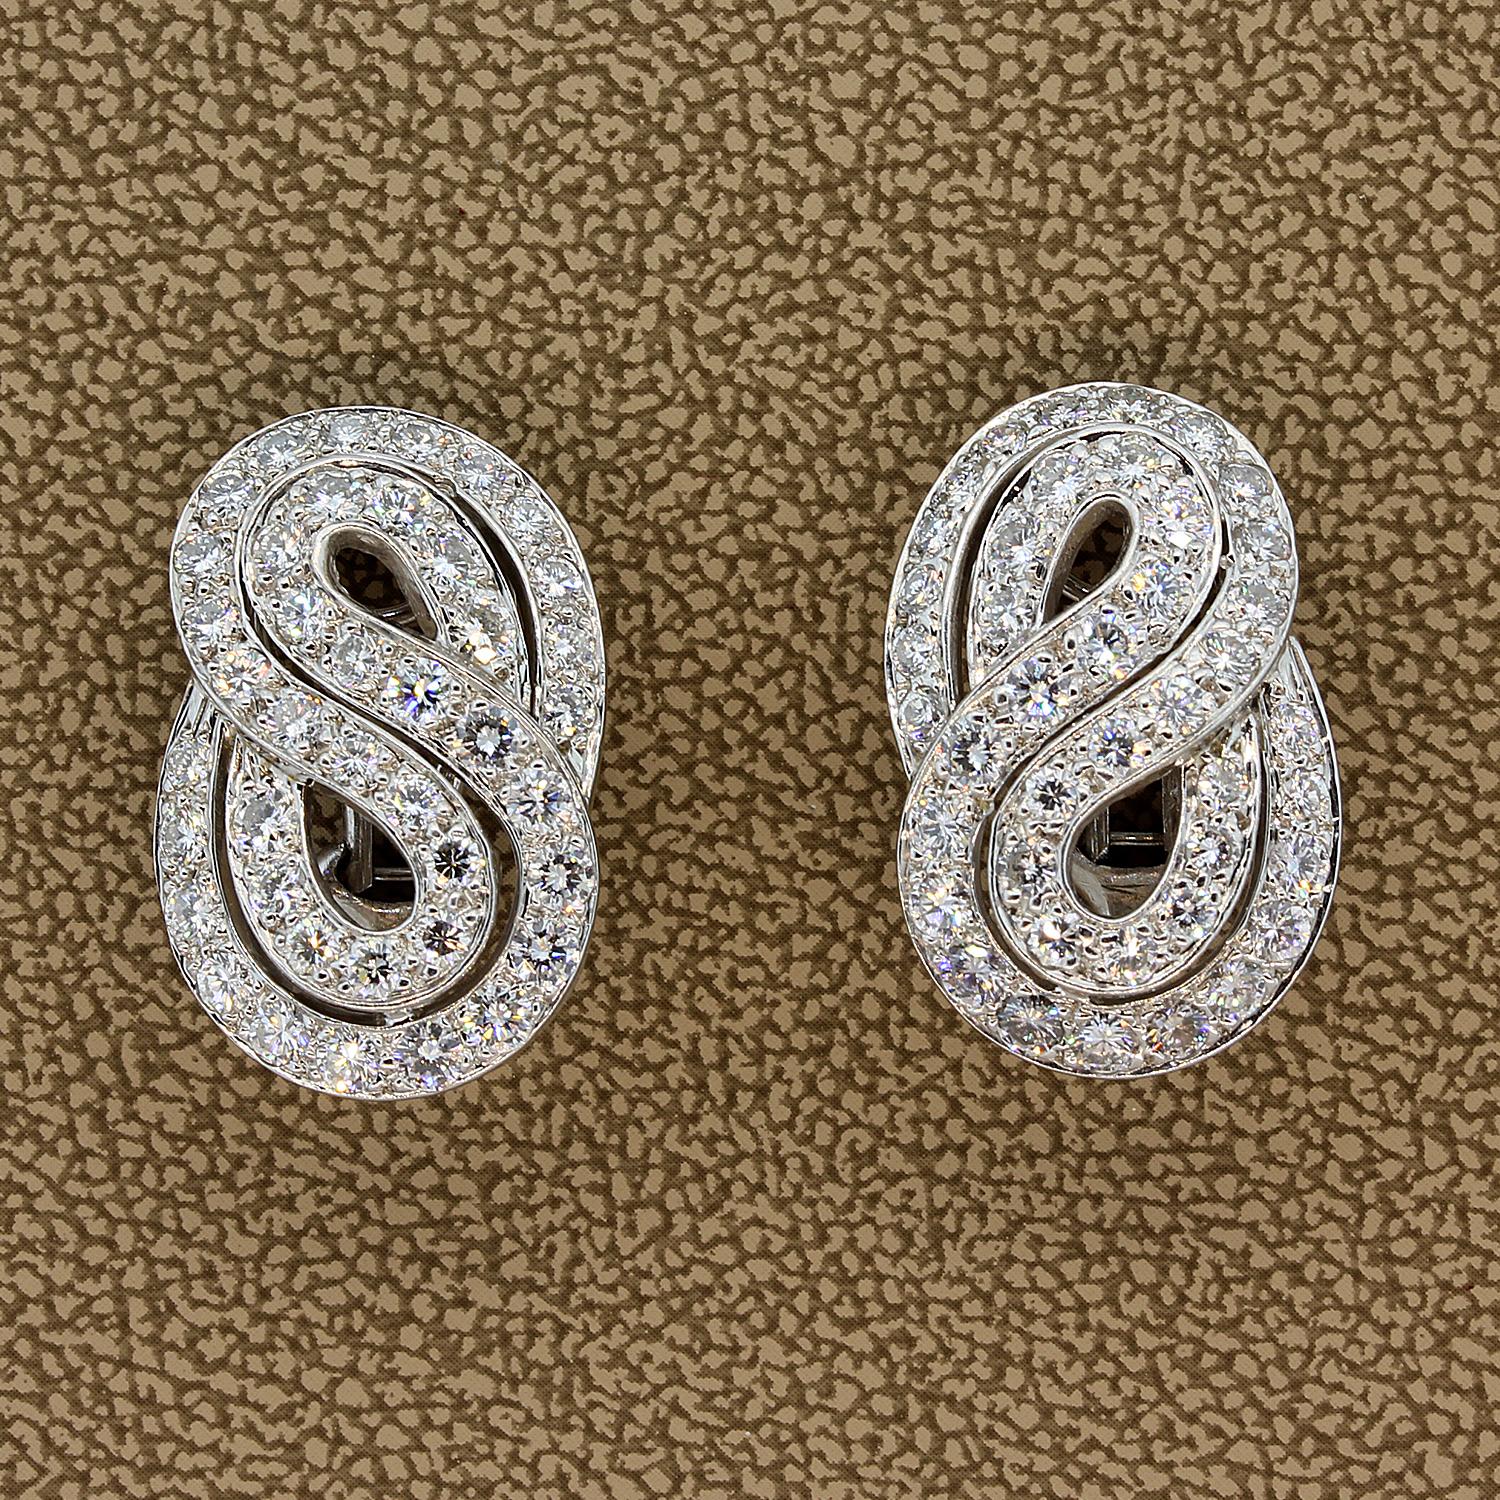 A pair of gold diamond clip earrings. There are 2.78 carats of VVS quality D-E-F color diamonds, the highest of quality. They are set in 18K white gold in an infinity styled design.  Whether it’s the quality you desire, the master craftsmanship or